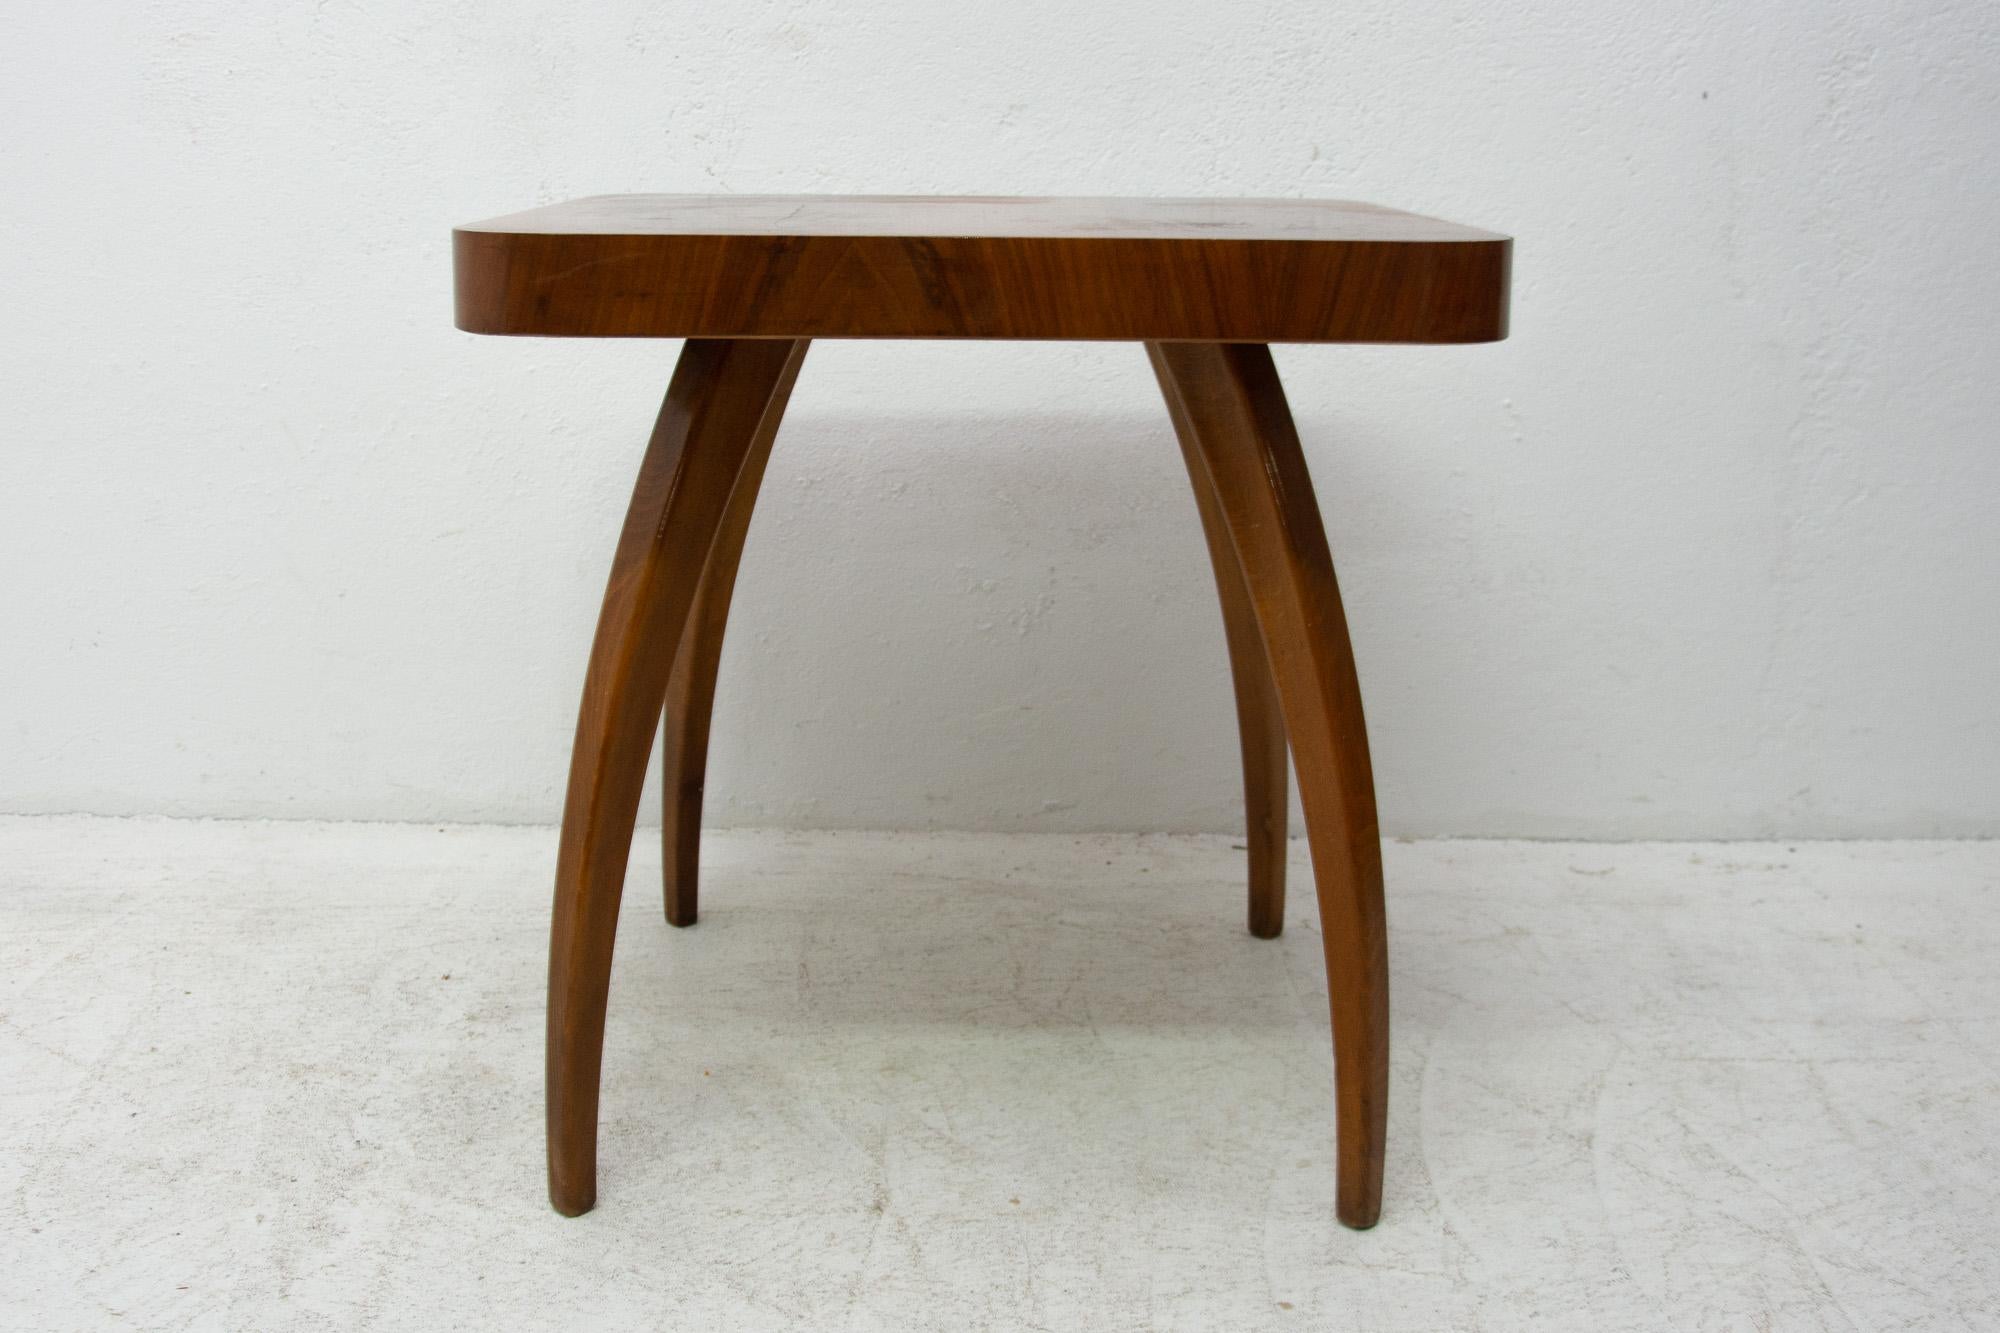 This walnut table called spider was designed by the world famous architect Jindrich Halabala under catalog no. H-259 in the 1930s and produced in the 1950s. Unique style of this table is recognized all-over the world. The table stands on four legs